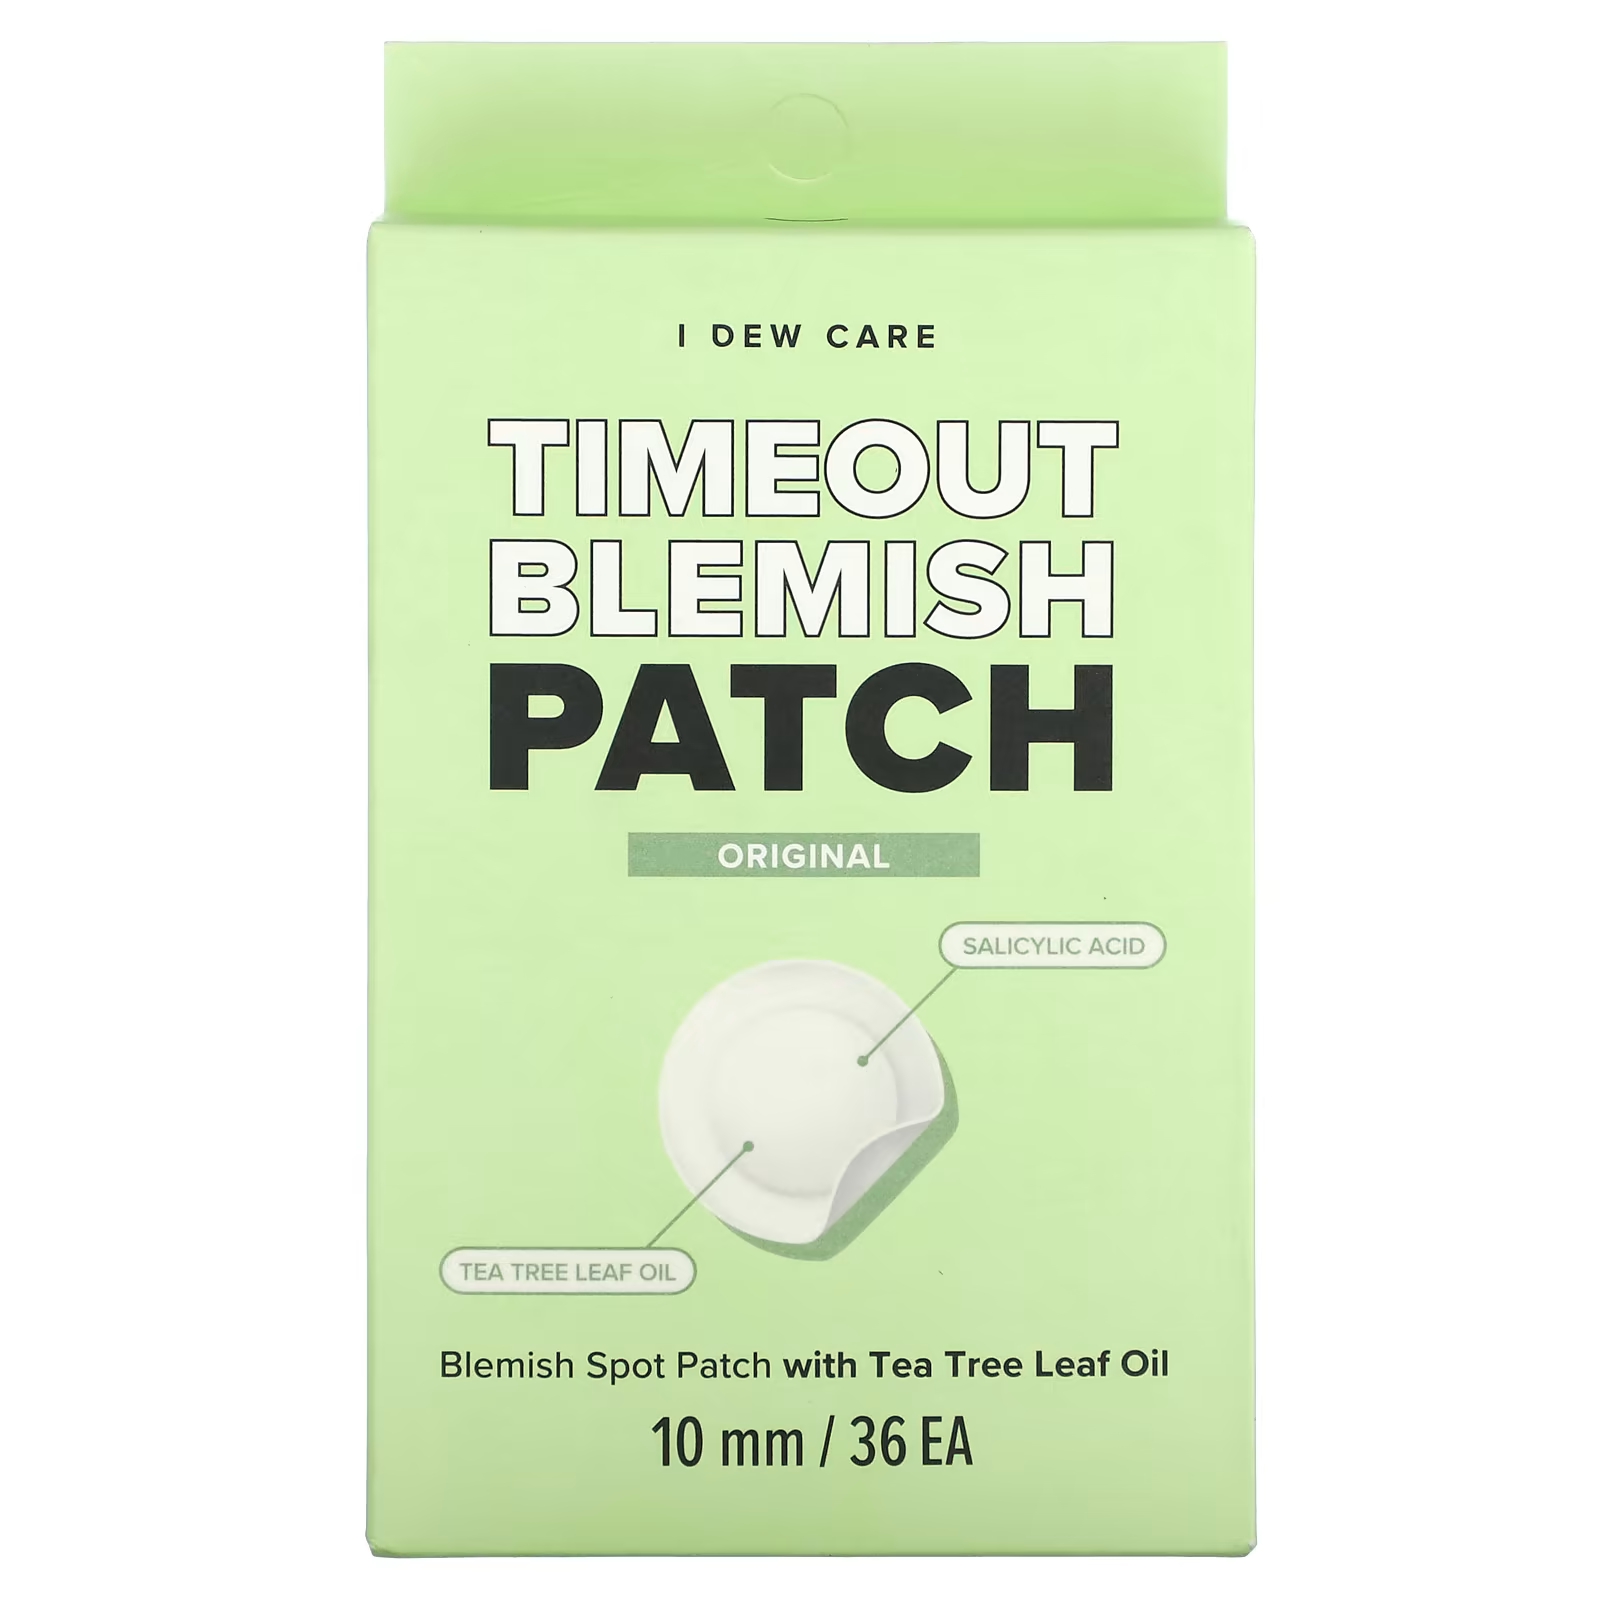 Патчи I Dew Care Timeout, 36 штук патчи от пятен i dew care timeout blemish patch dark spot 32 патча